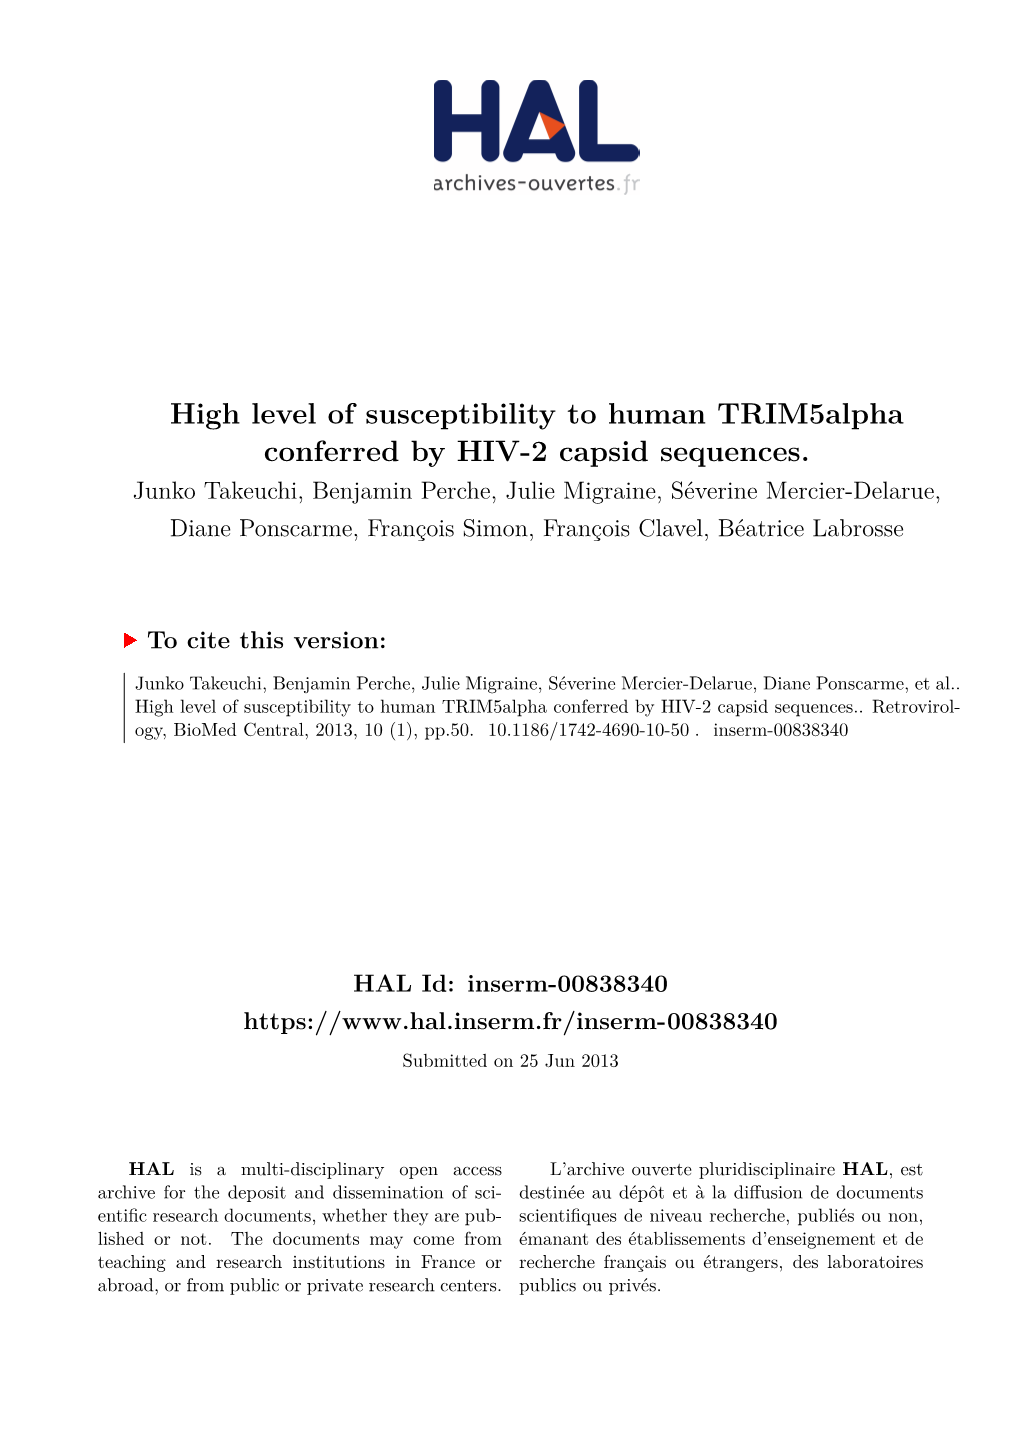 High Level of Susceptibility to Human Trim5alpha Conferred by HIV-2 Capsid Sequences